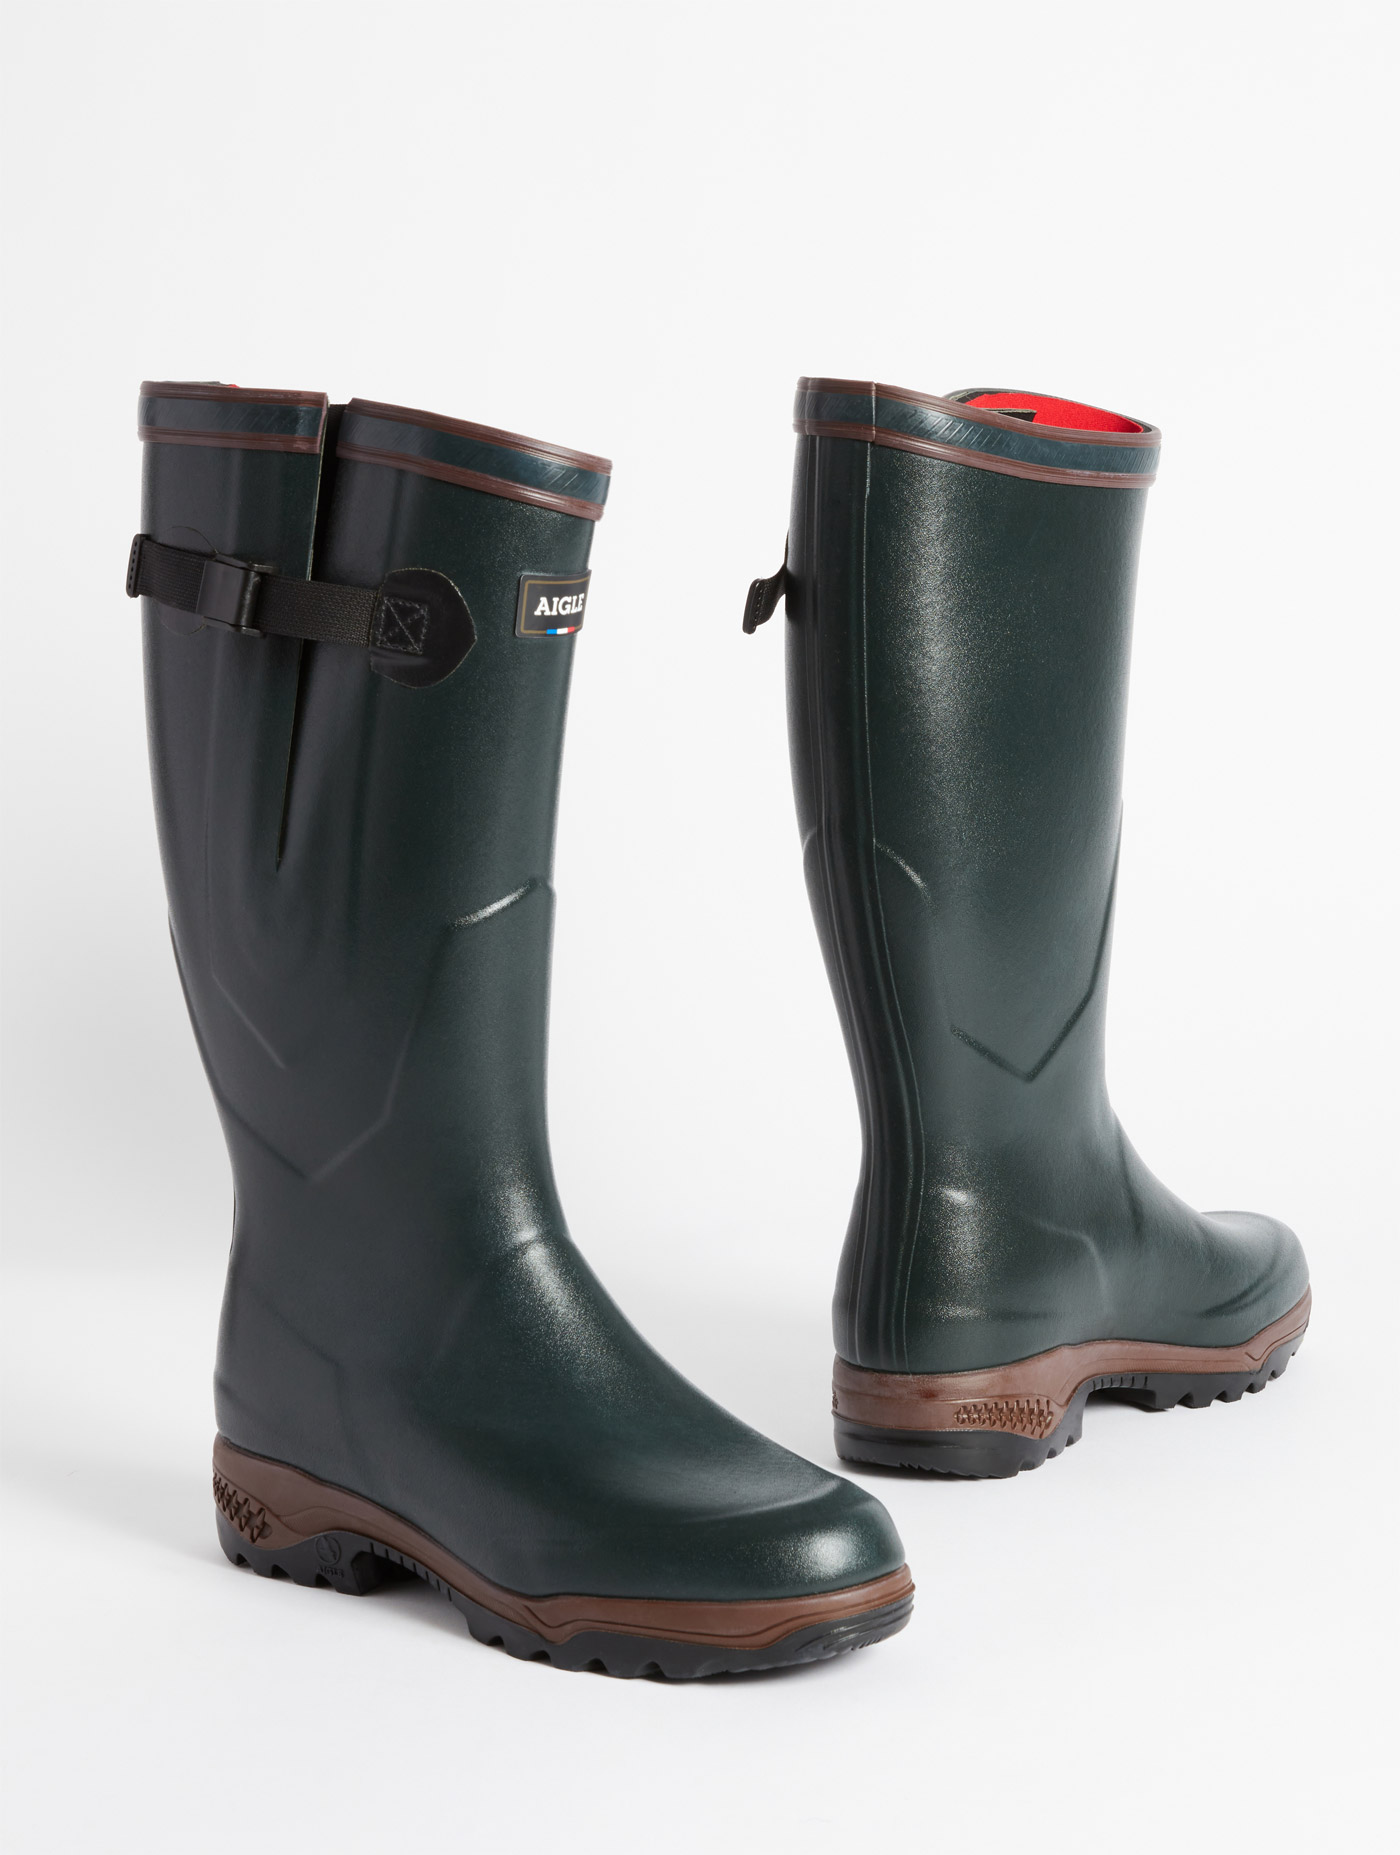 Bottes anti-fatigue contre le froid Made in France